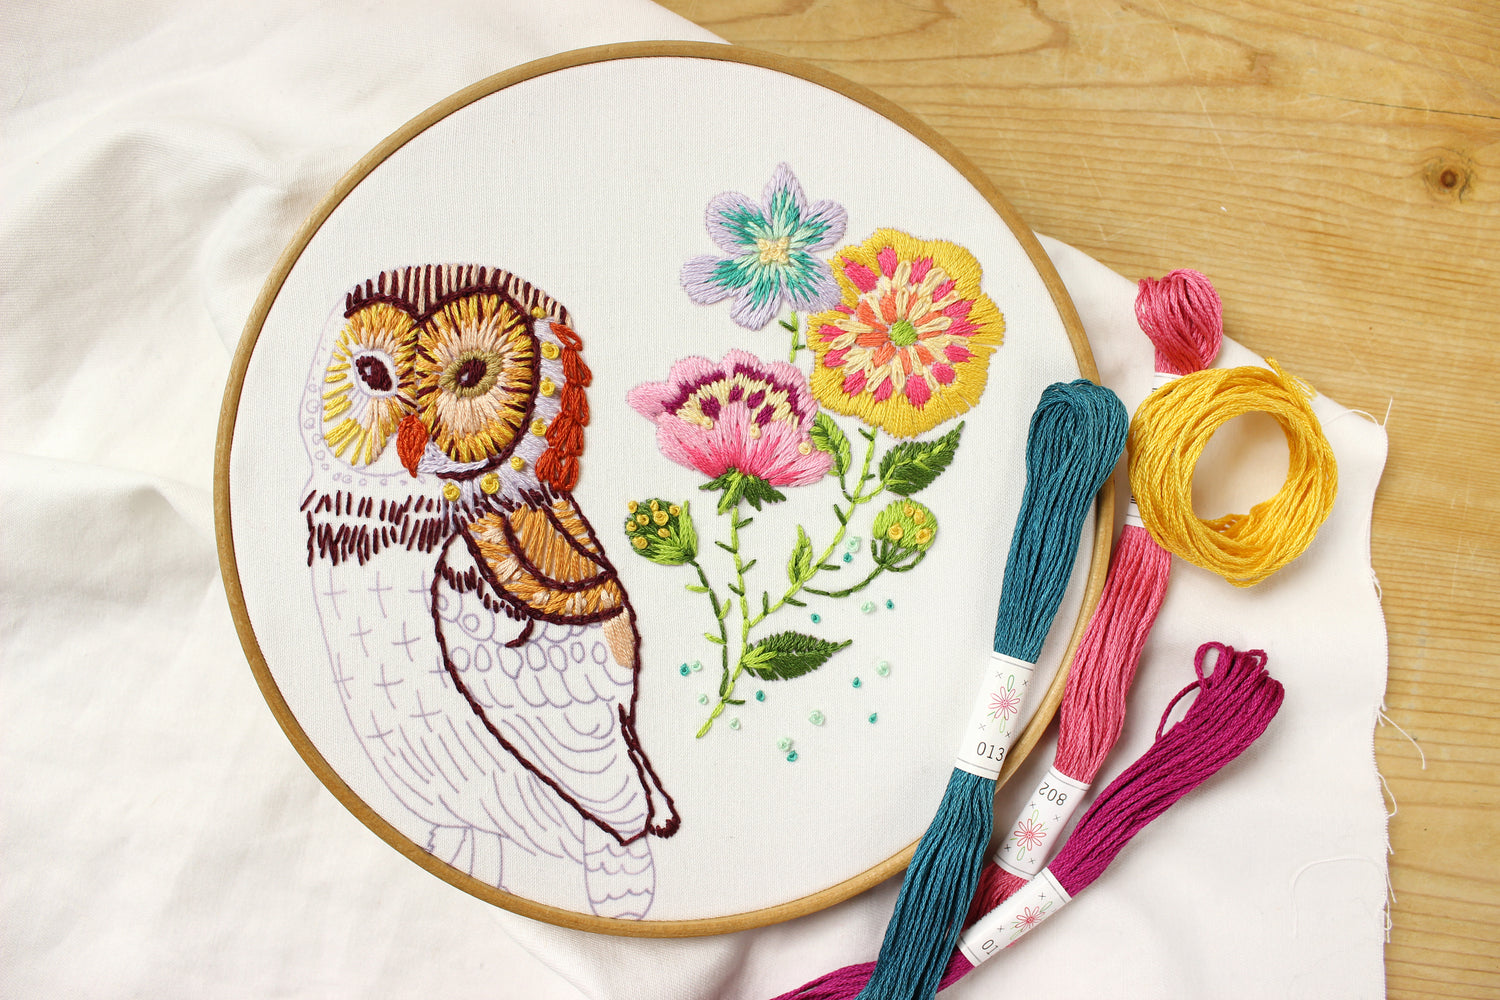 Best embroidery stitches. Top 10 stitches to learn